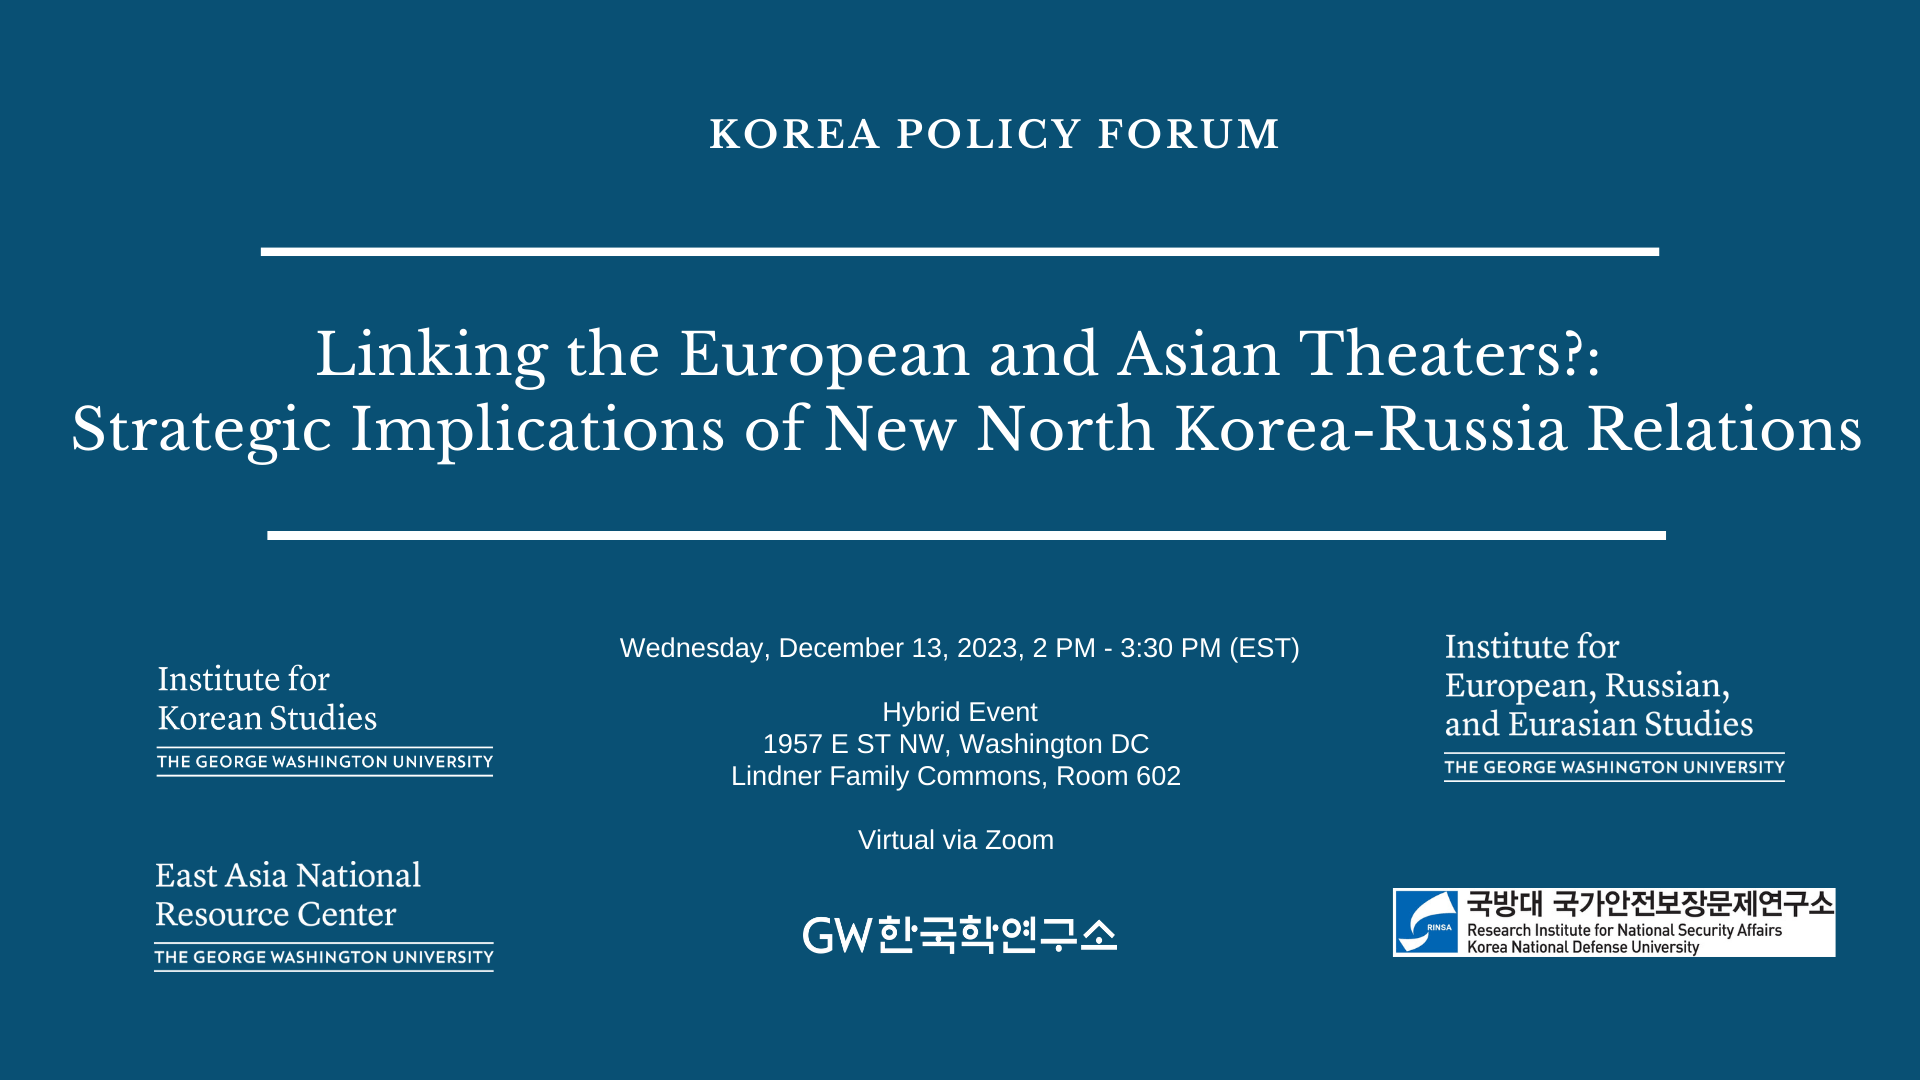 Flyer announcing Korea Policy Forum Event entitled "Linking the European and Asian Theaters?: Strategic Implications of New North Korea-Russia Relations" on Wednesday, December 13, 2023 at 2 pm at Lindner Family Commons (Room 602) or Virtual via Zoom.